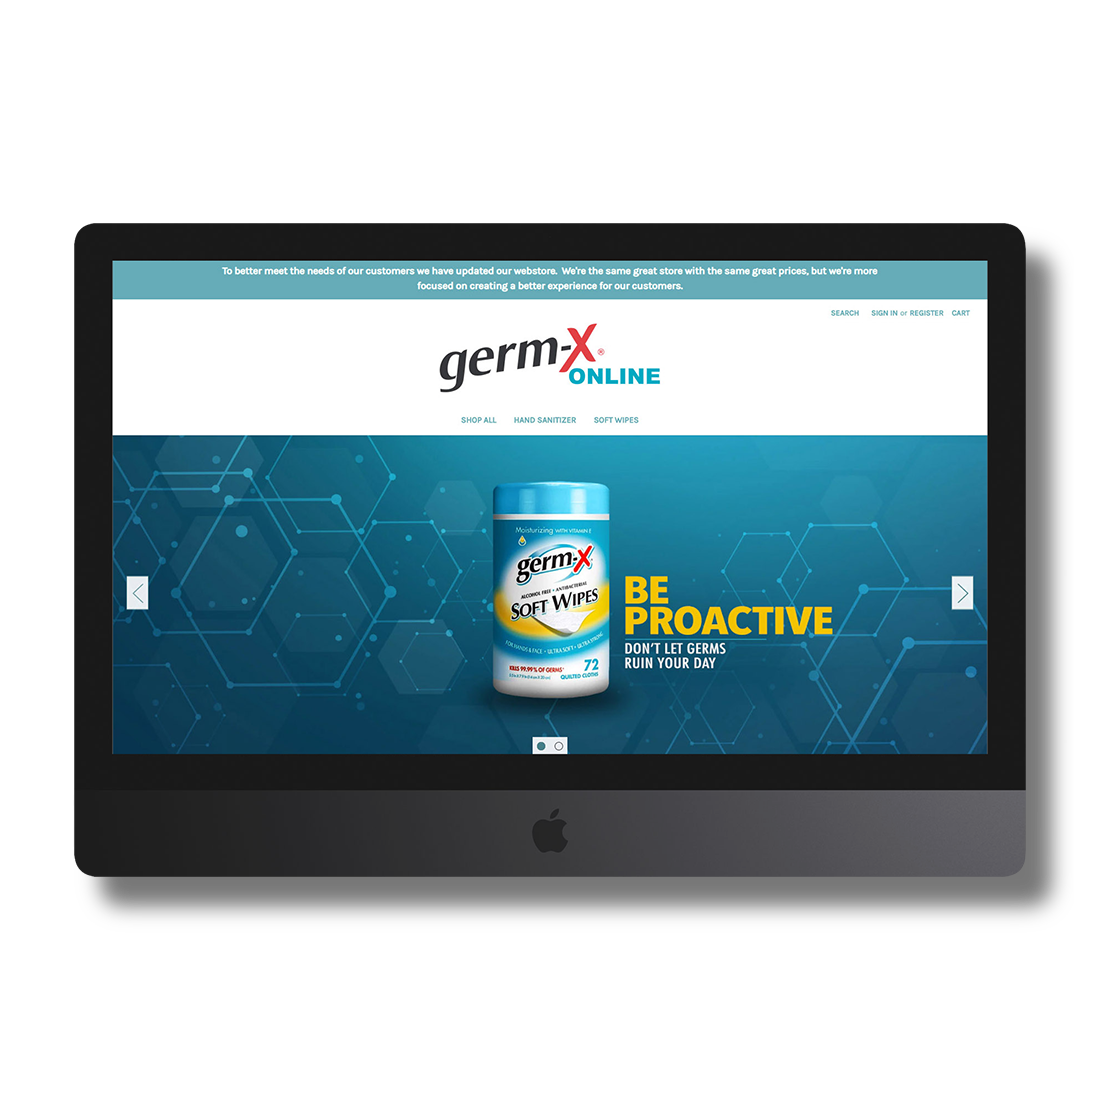 Image of computer for Germ-x case study